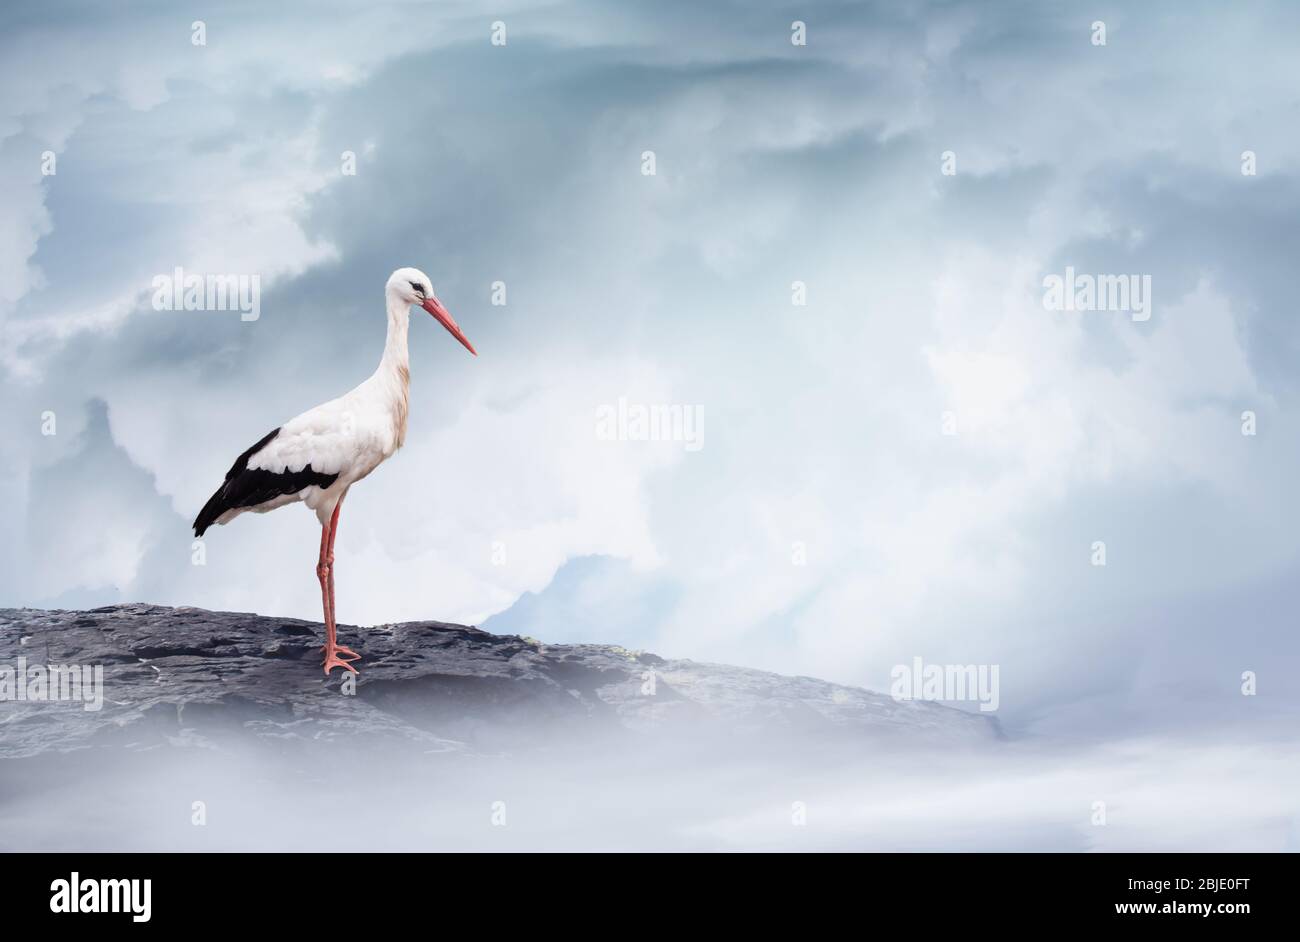 White stork on a mountain rock in the cloudy sky. Greeting card template for future or newborn baby. Stock Photo